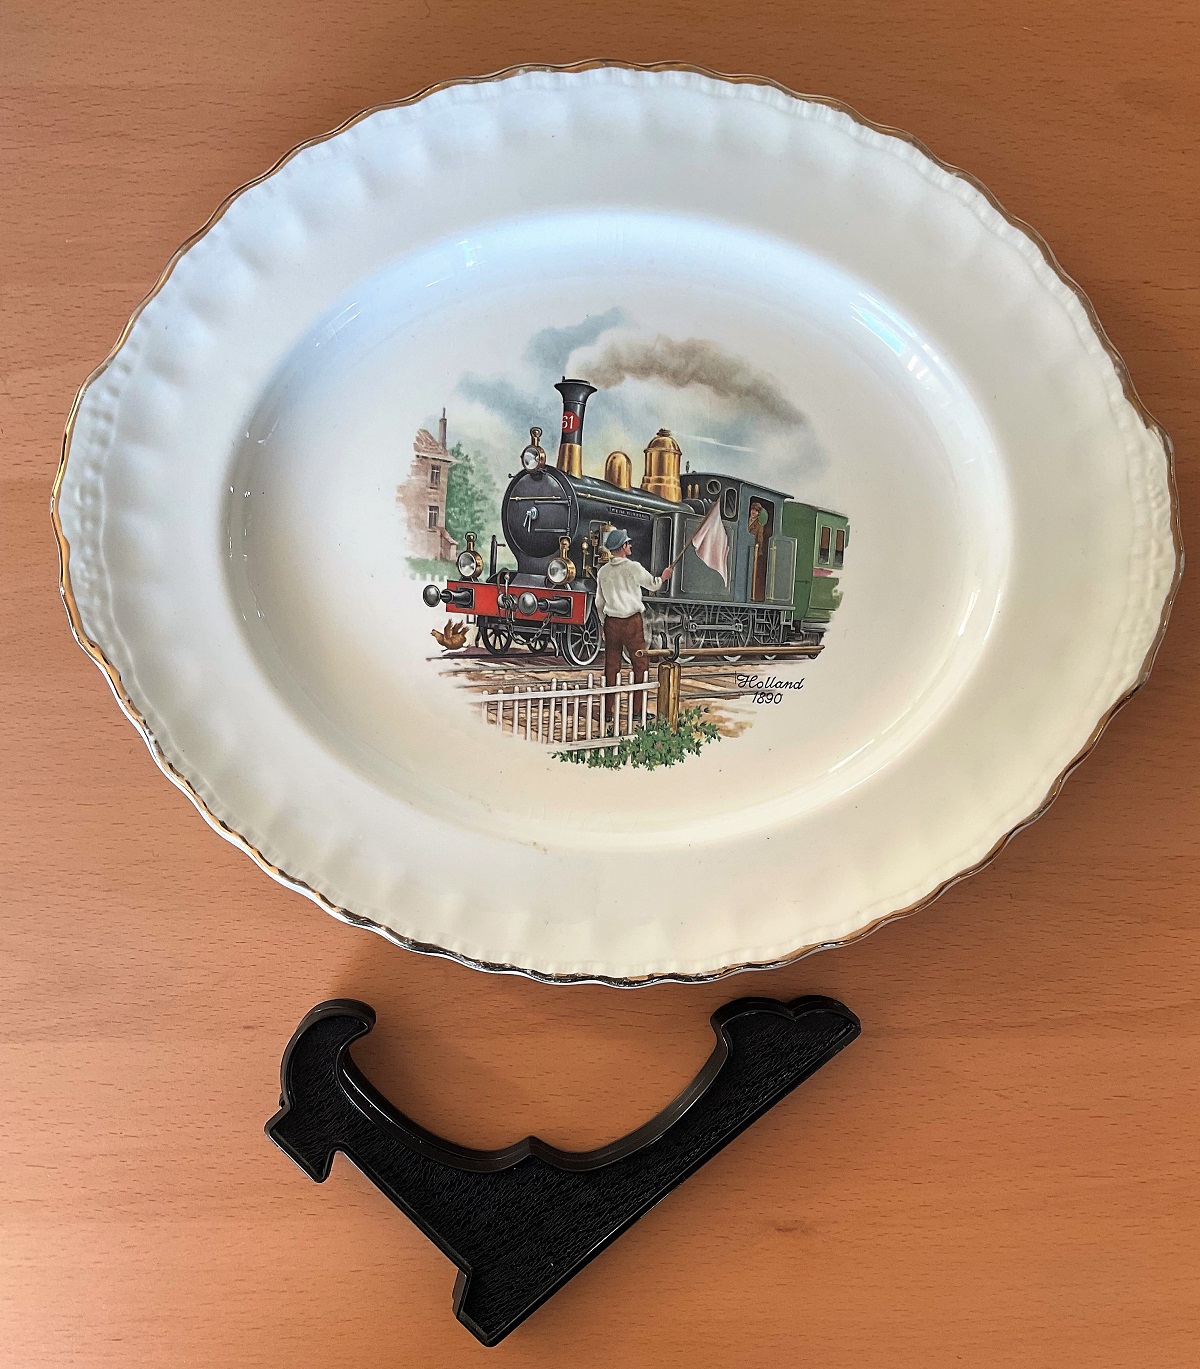 Liverpool Road Pottery LTD of Stoke on Trent. Holland 1890 Ceramic Decorative Plate with stand.